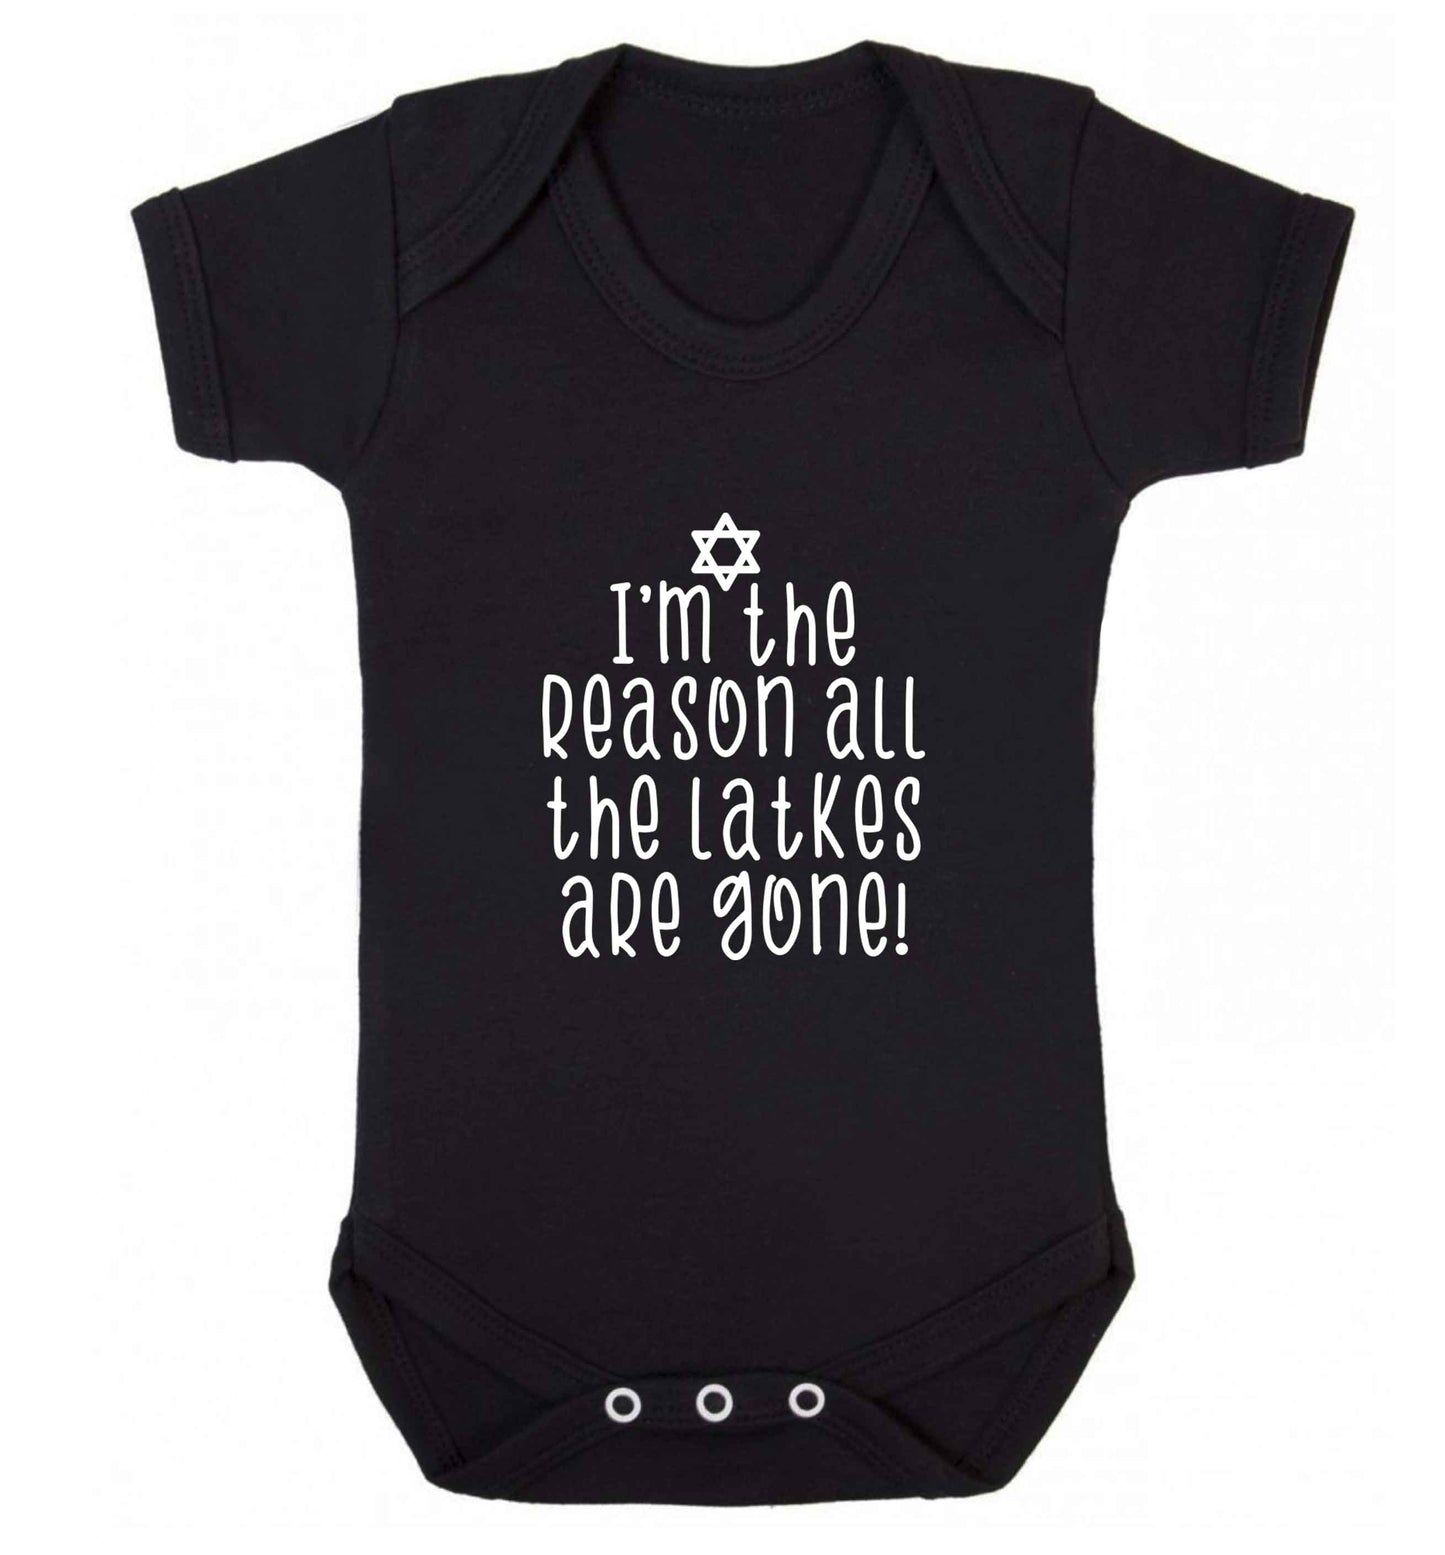 I'm the reason all the latkes are gone baby vest black 18-24 months